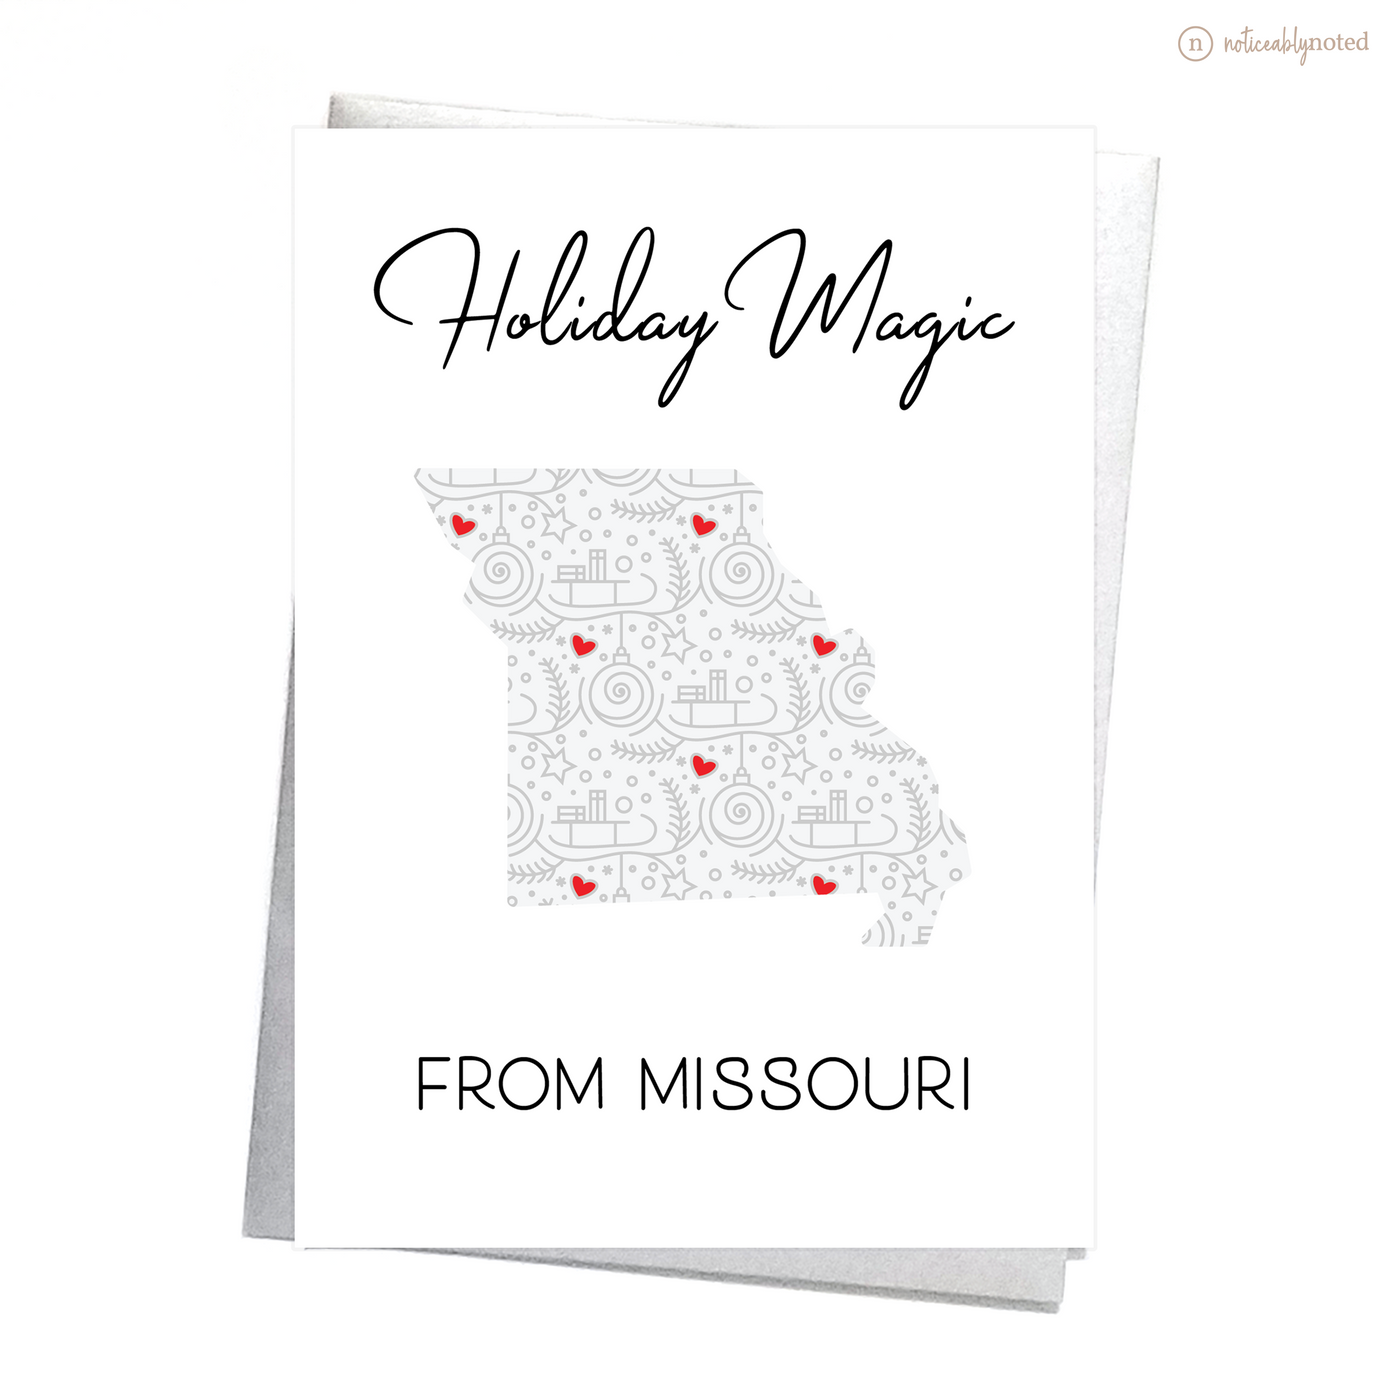 MO Christmas Card | Noticeably Noted